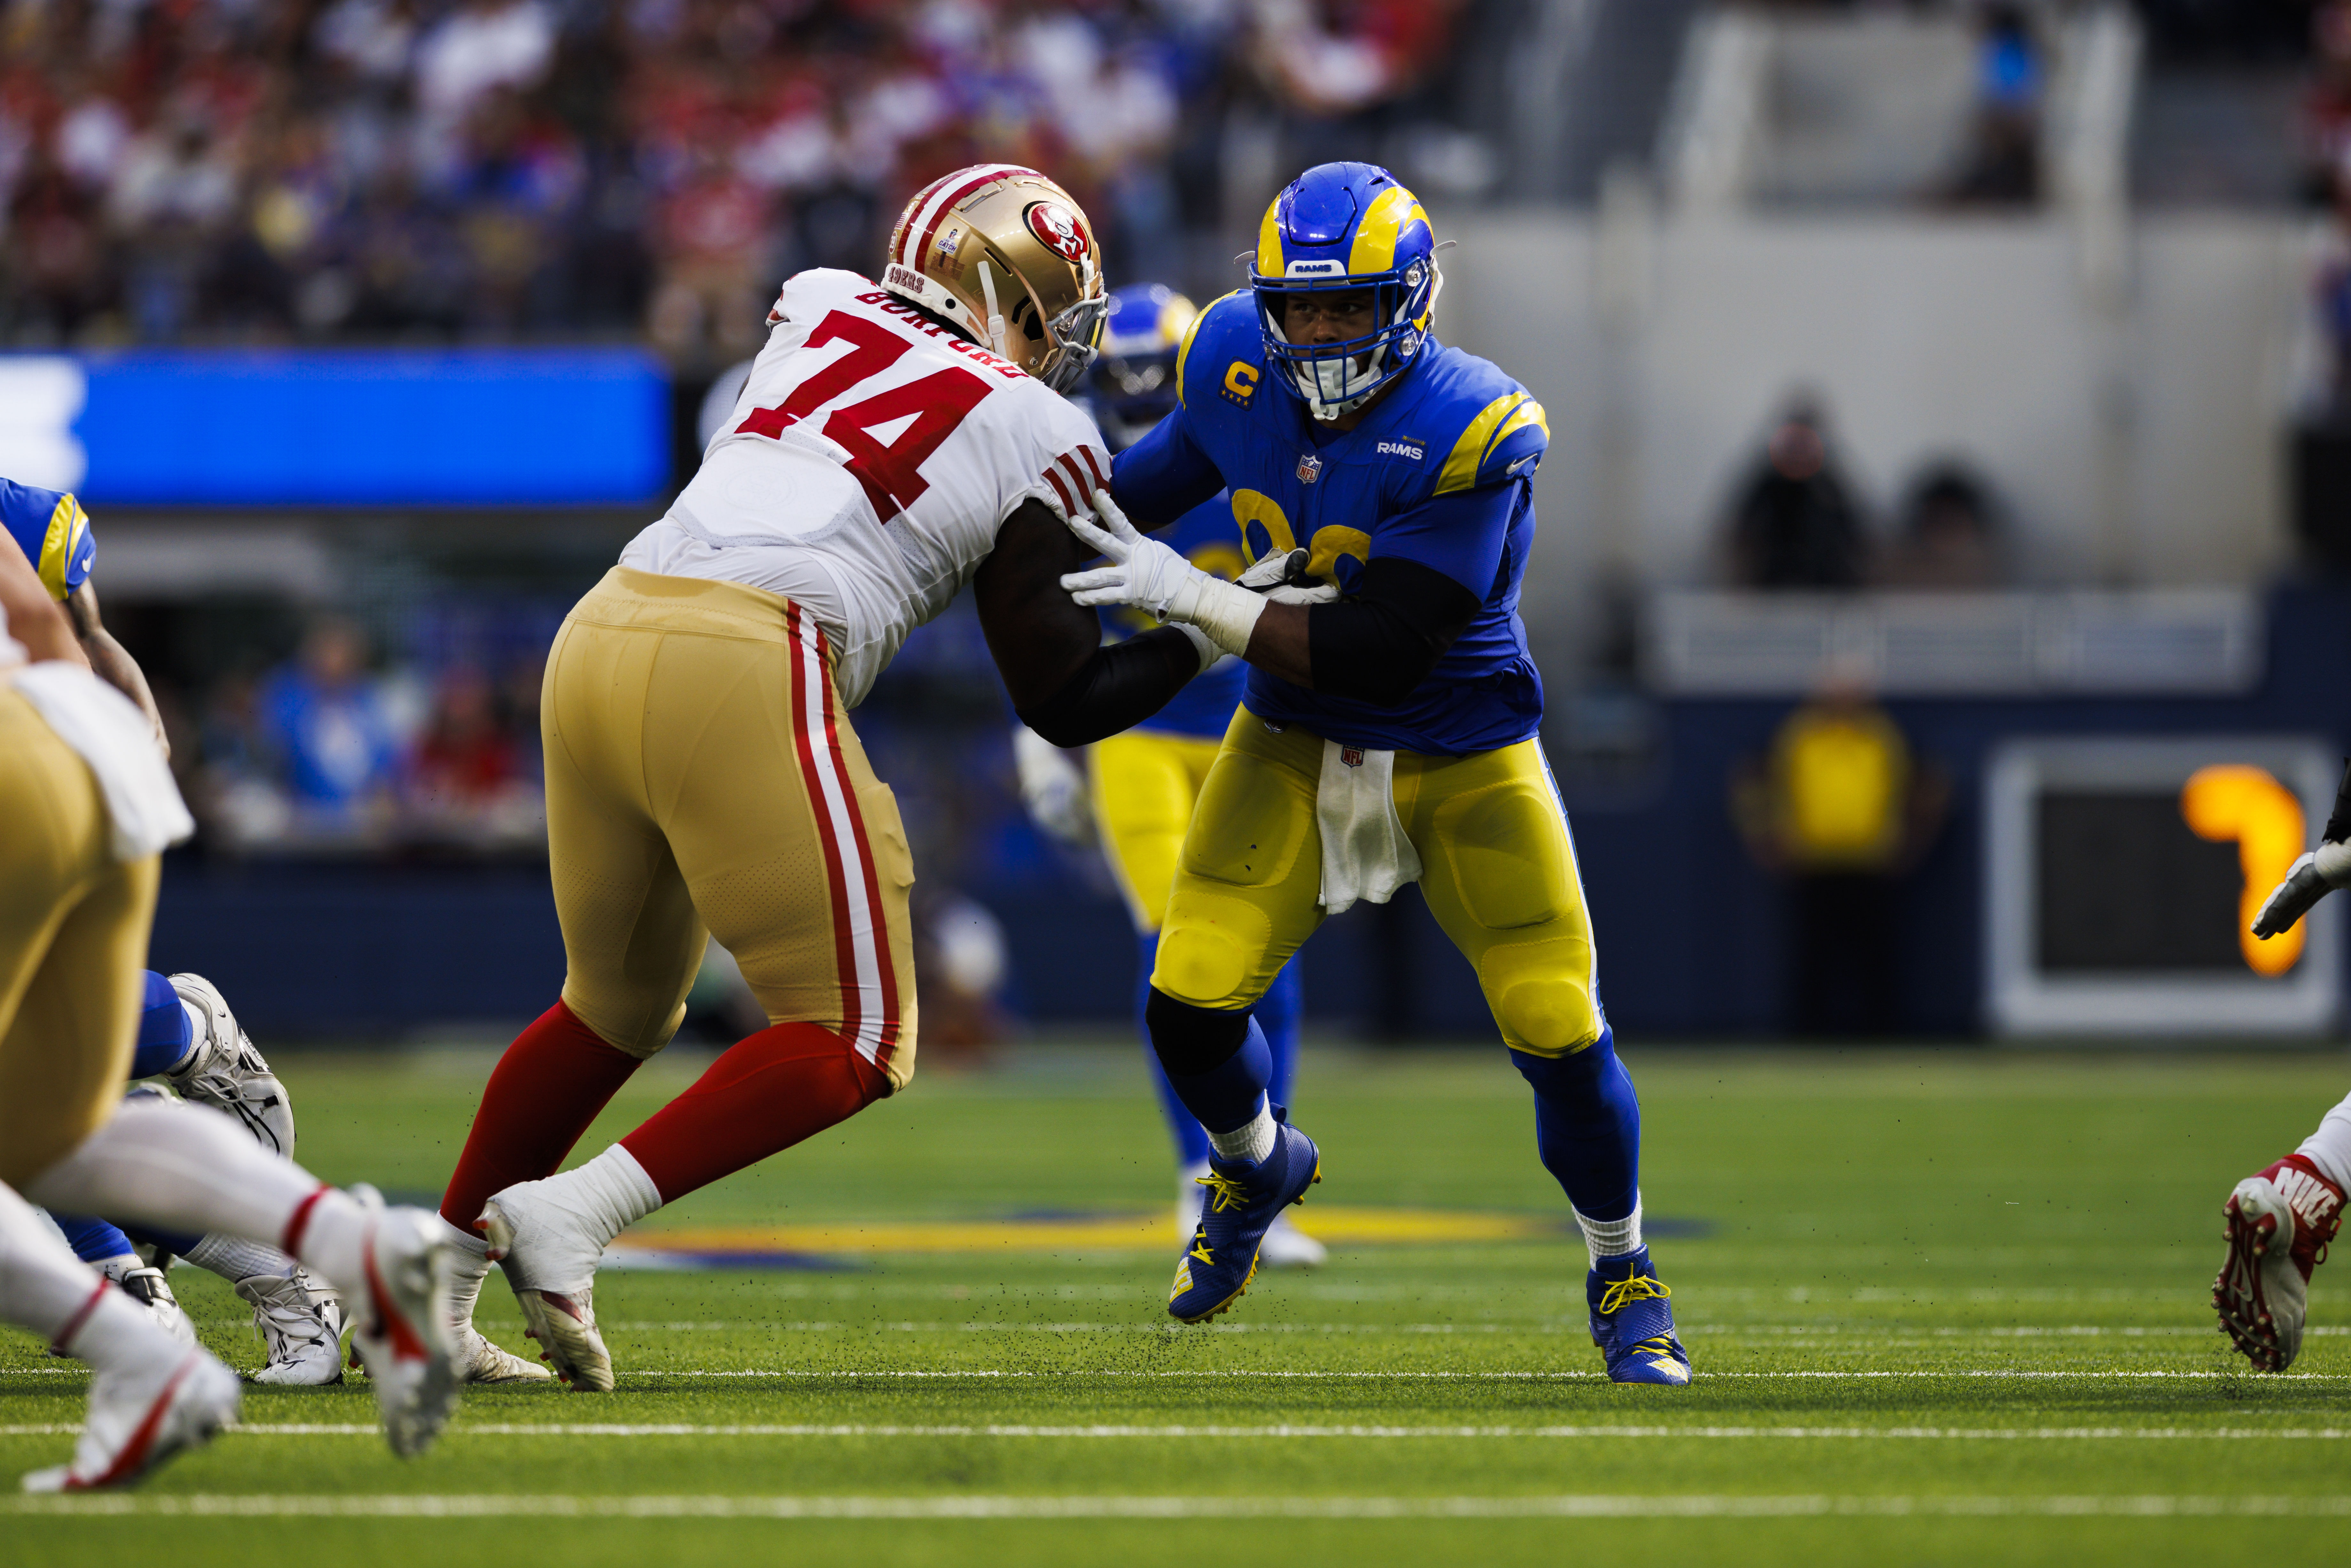 NFL: OCT 30 49ers at Rams